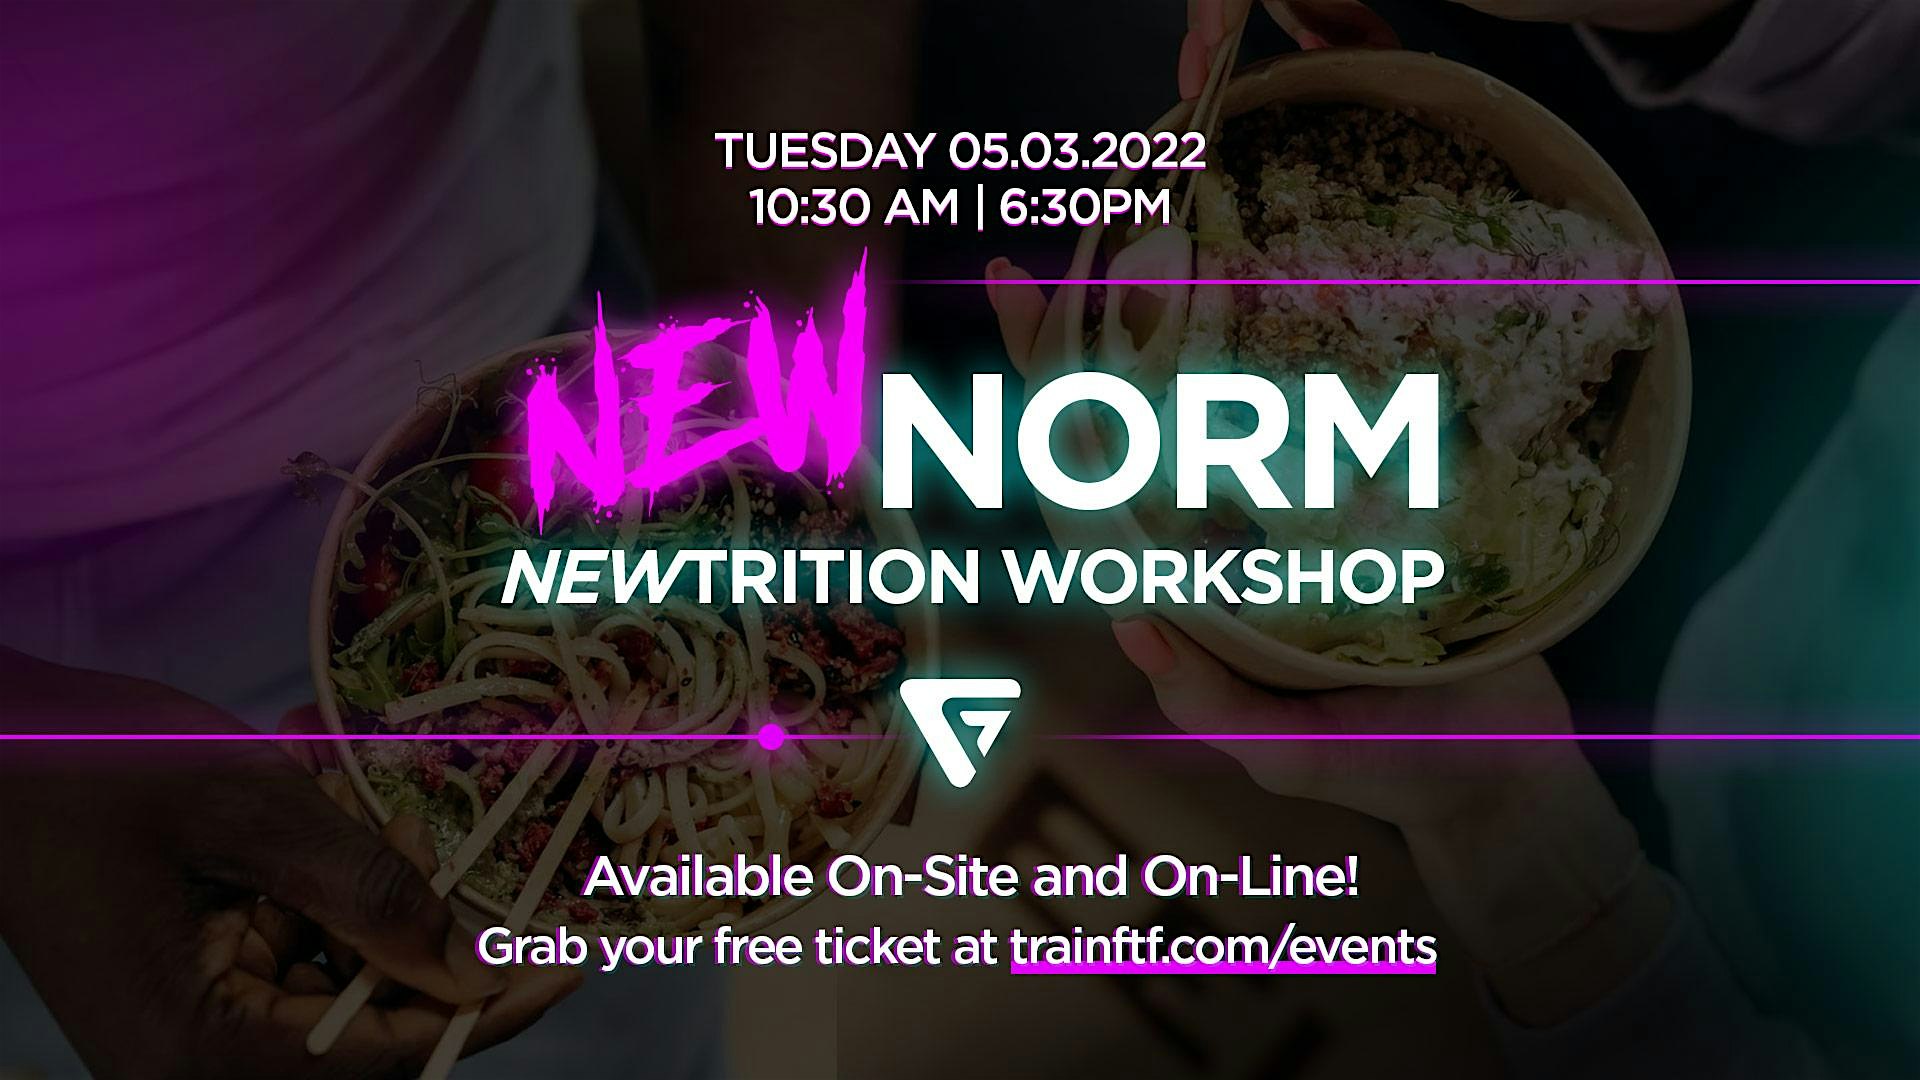 New Norm Newtrition Workshop: Morning